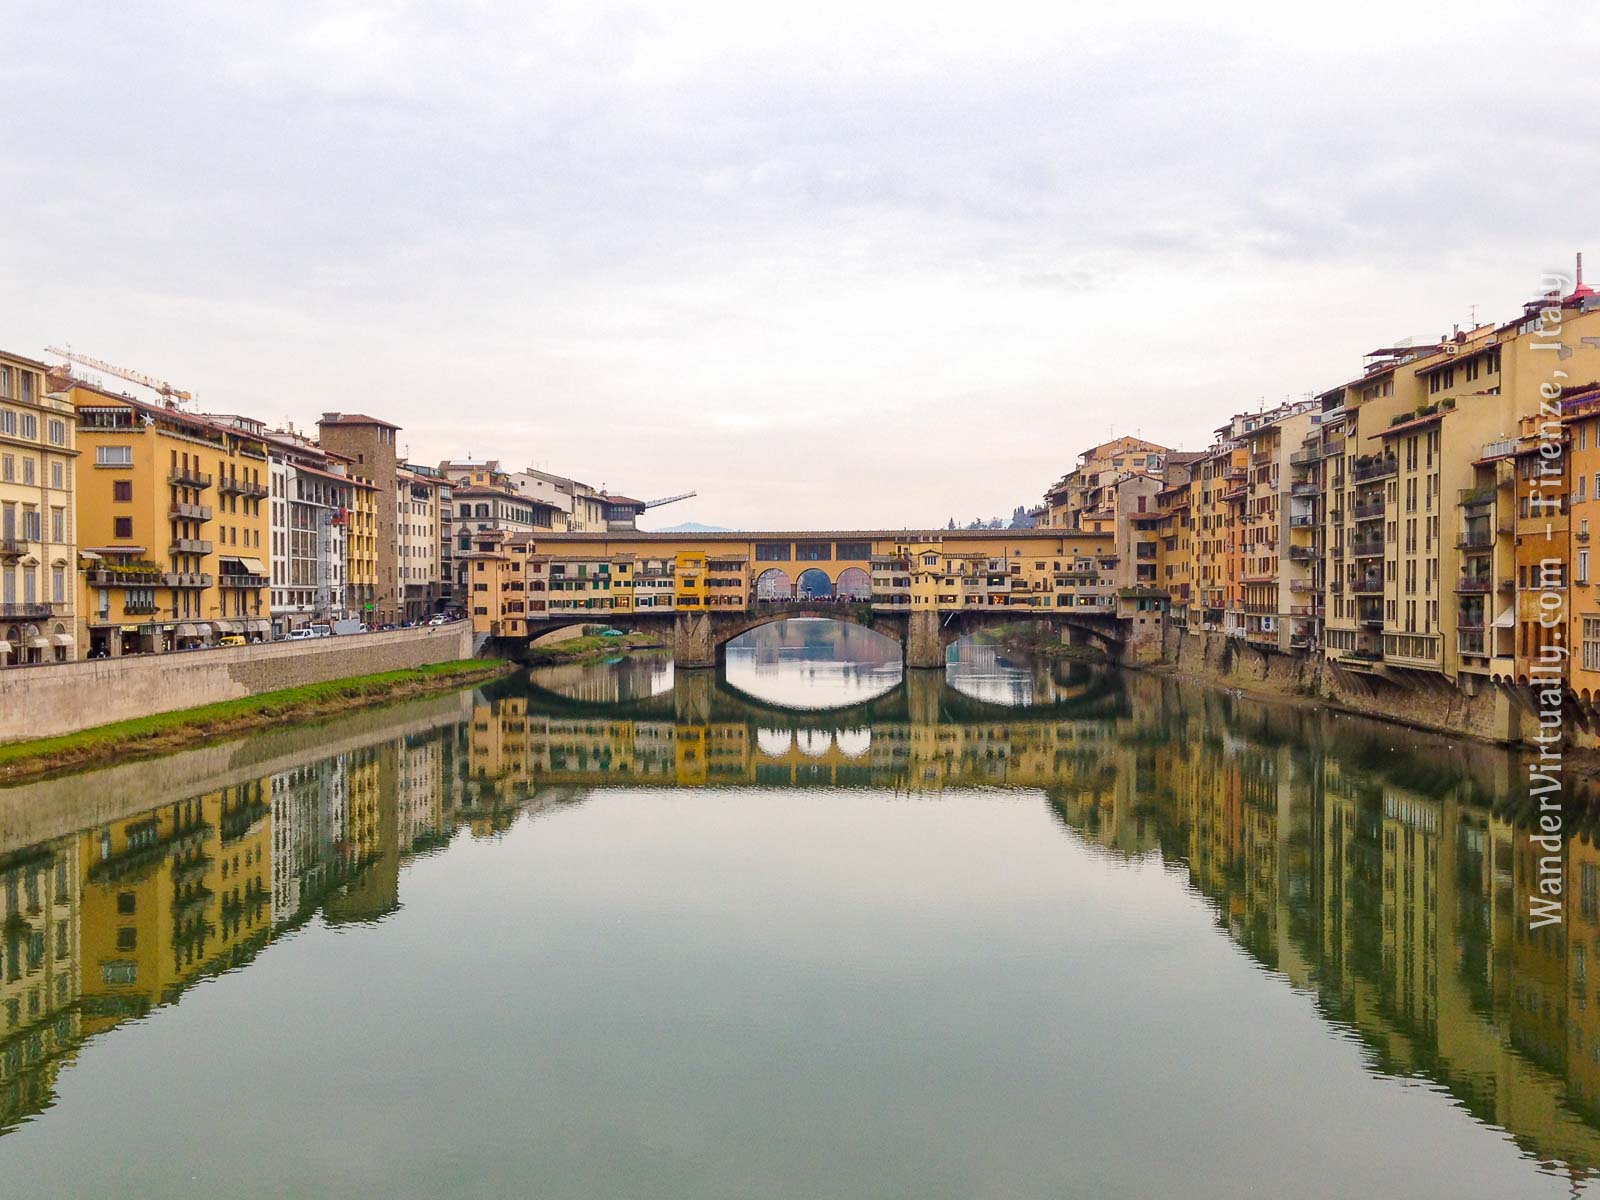 A view of the iconic Ponte Vecchio from Ponte alle Grazie, in Firenze, Italy. CC BY-ND 4.0.